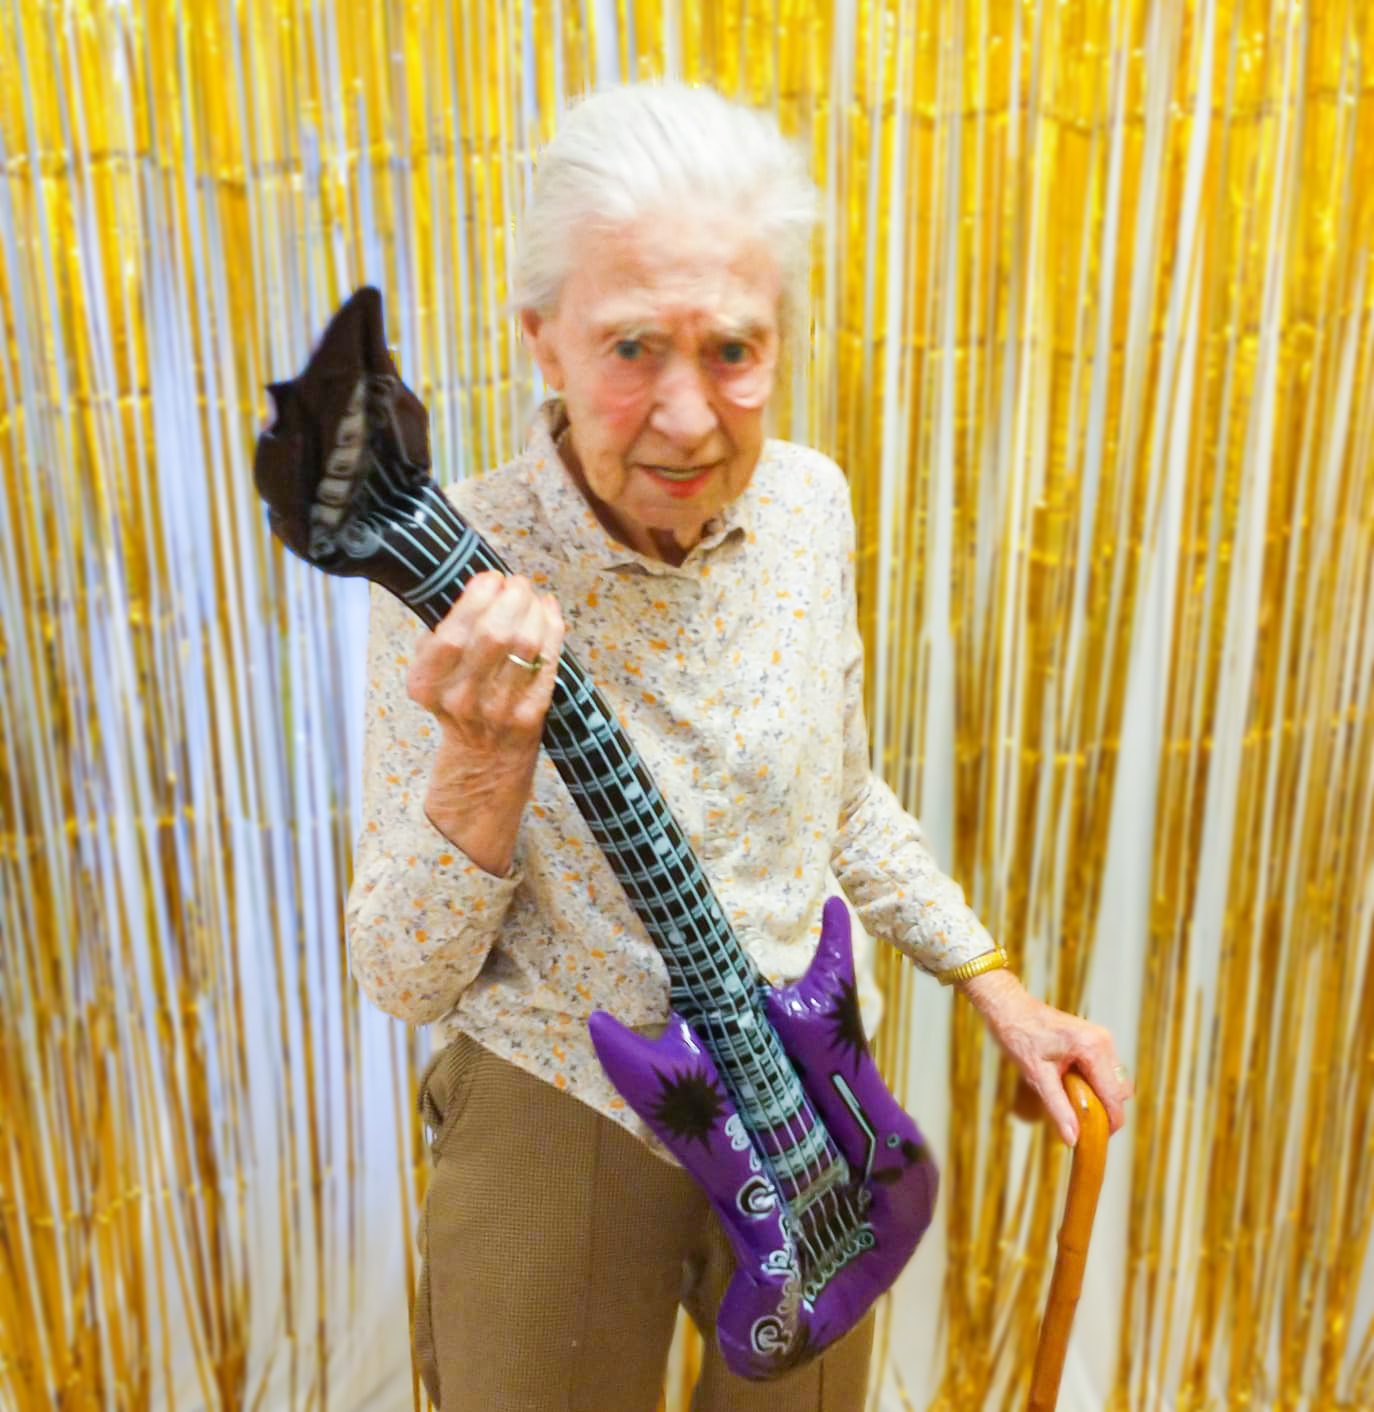 A resident from The Lawn care home playing guitar - 2023 January highlights